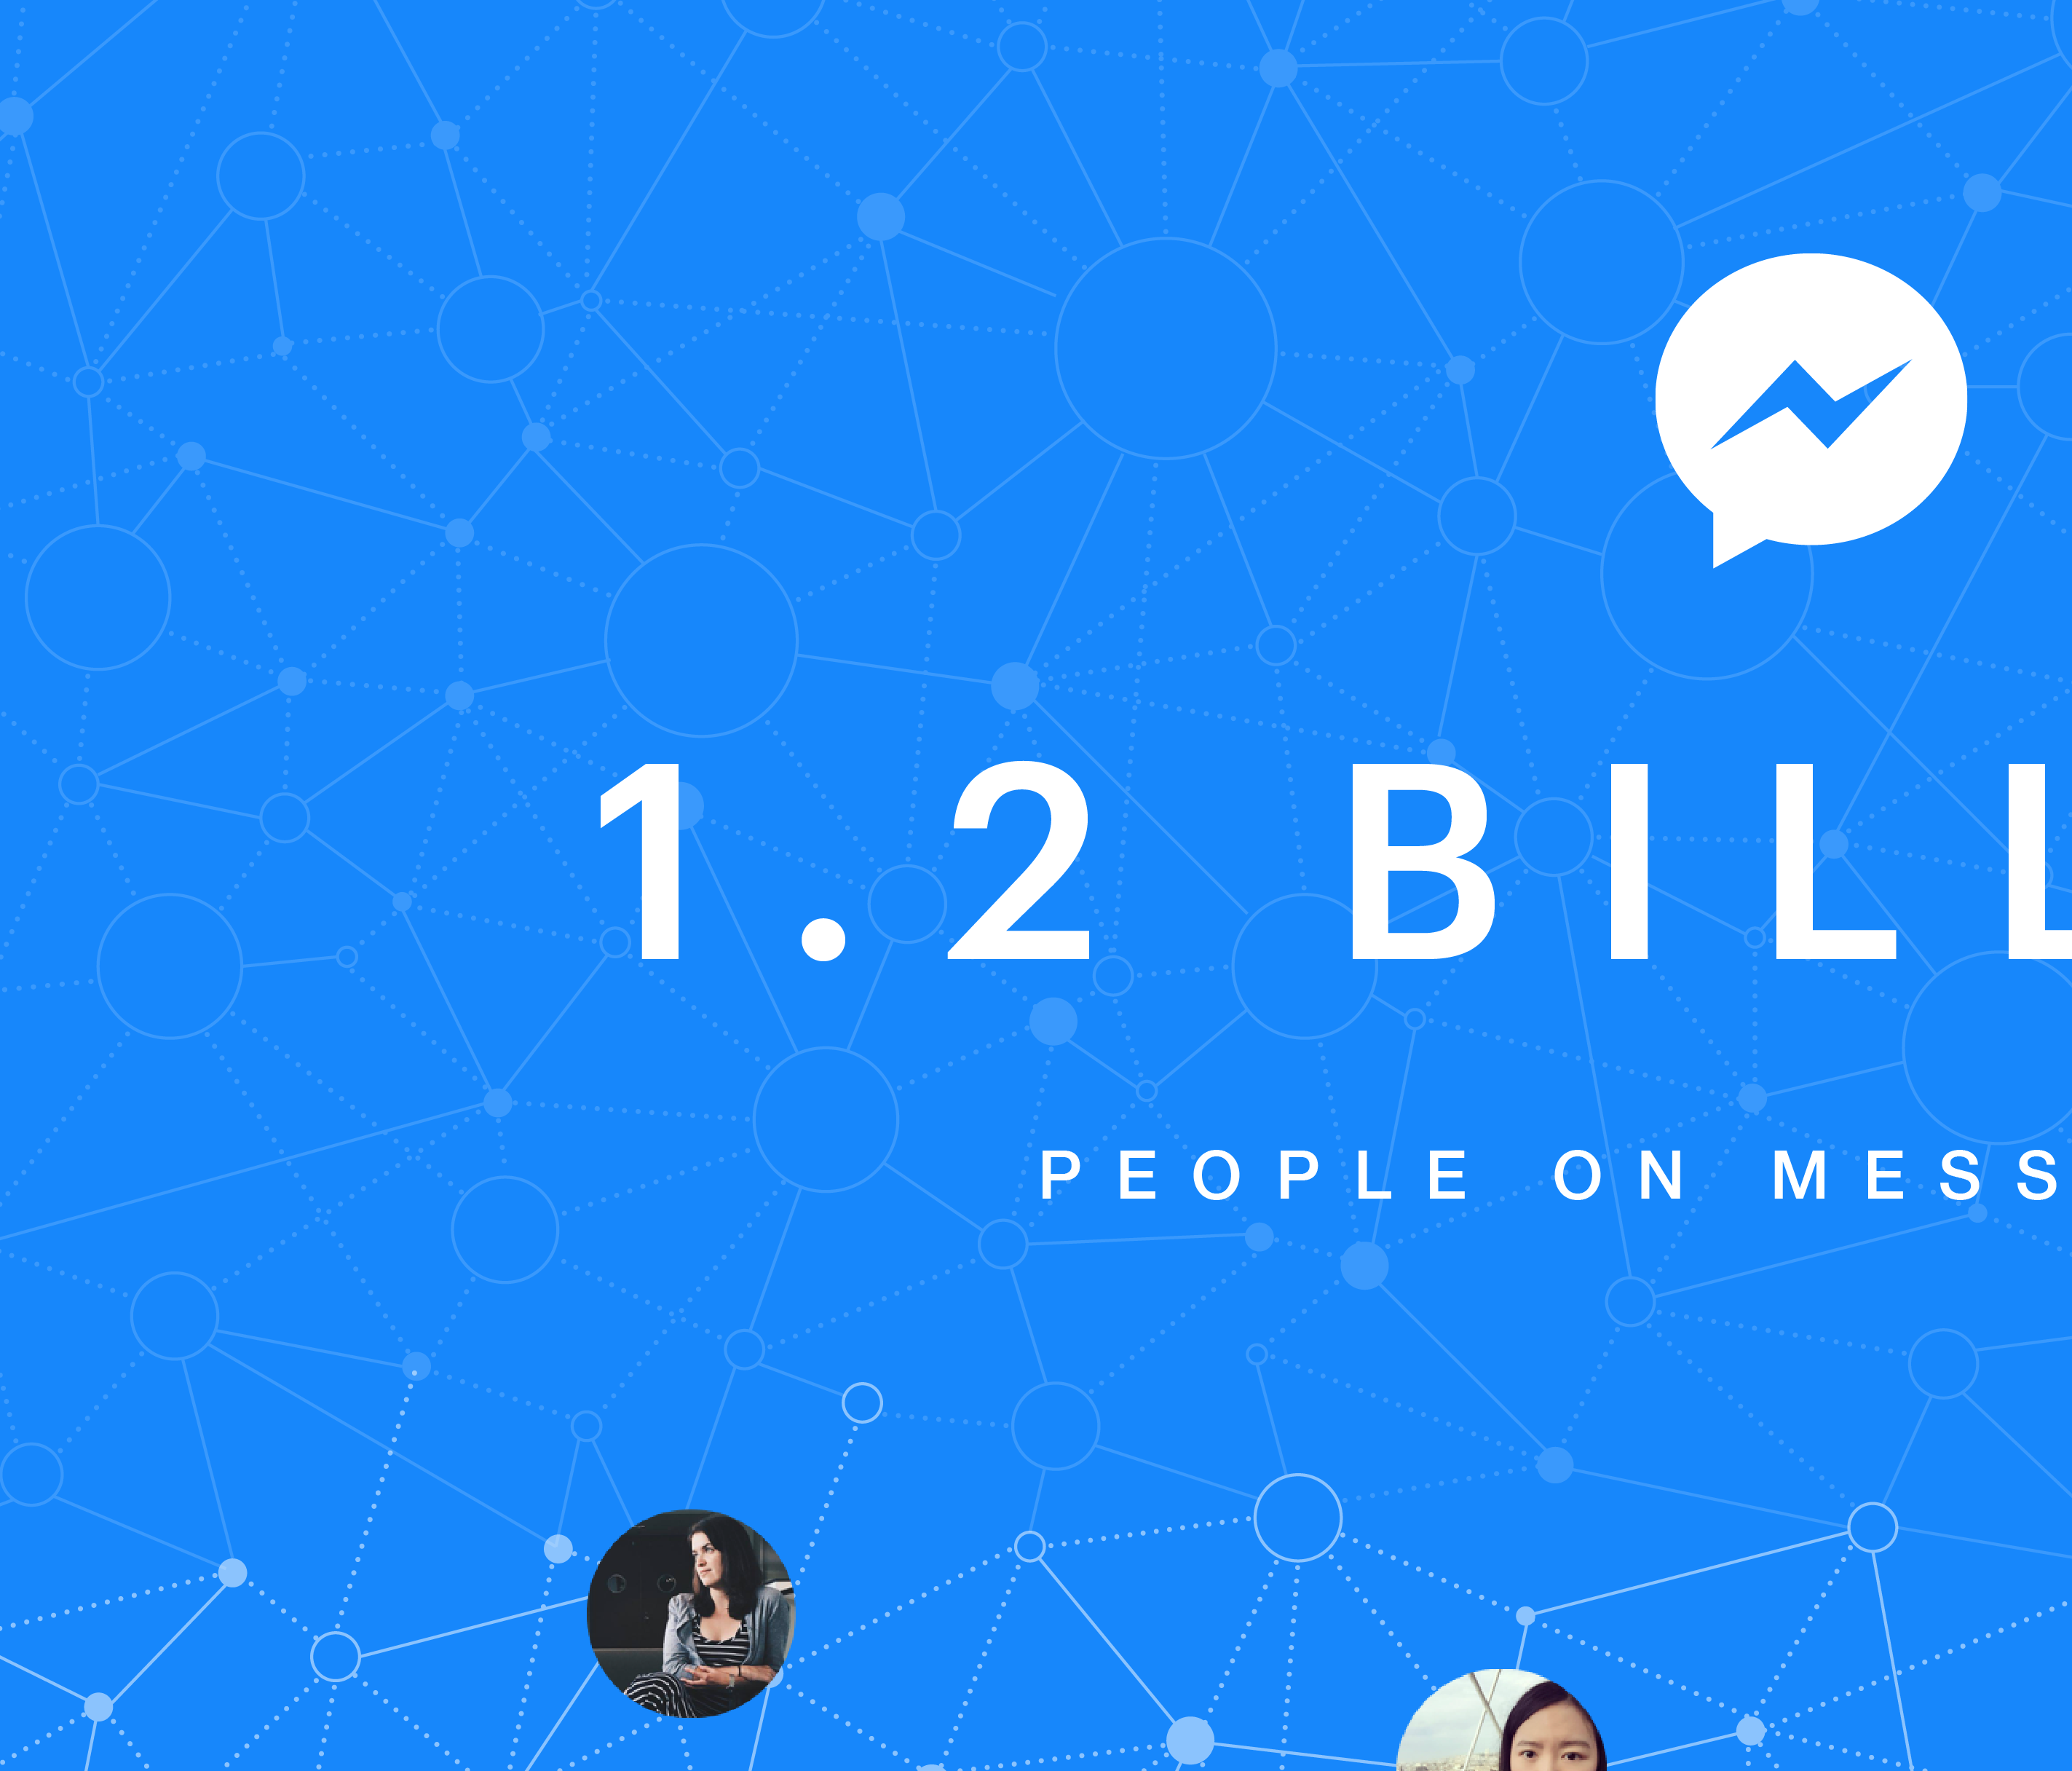 Facebook Messenger says it now has 1.2 billion monthly active users.